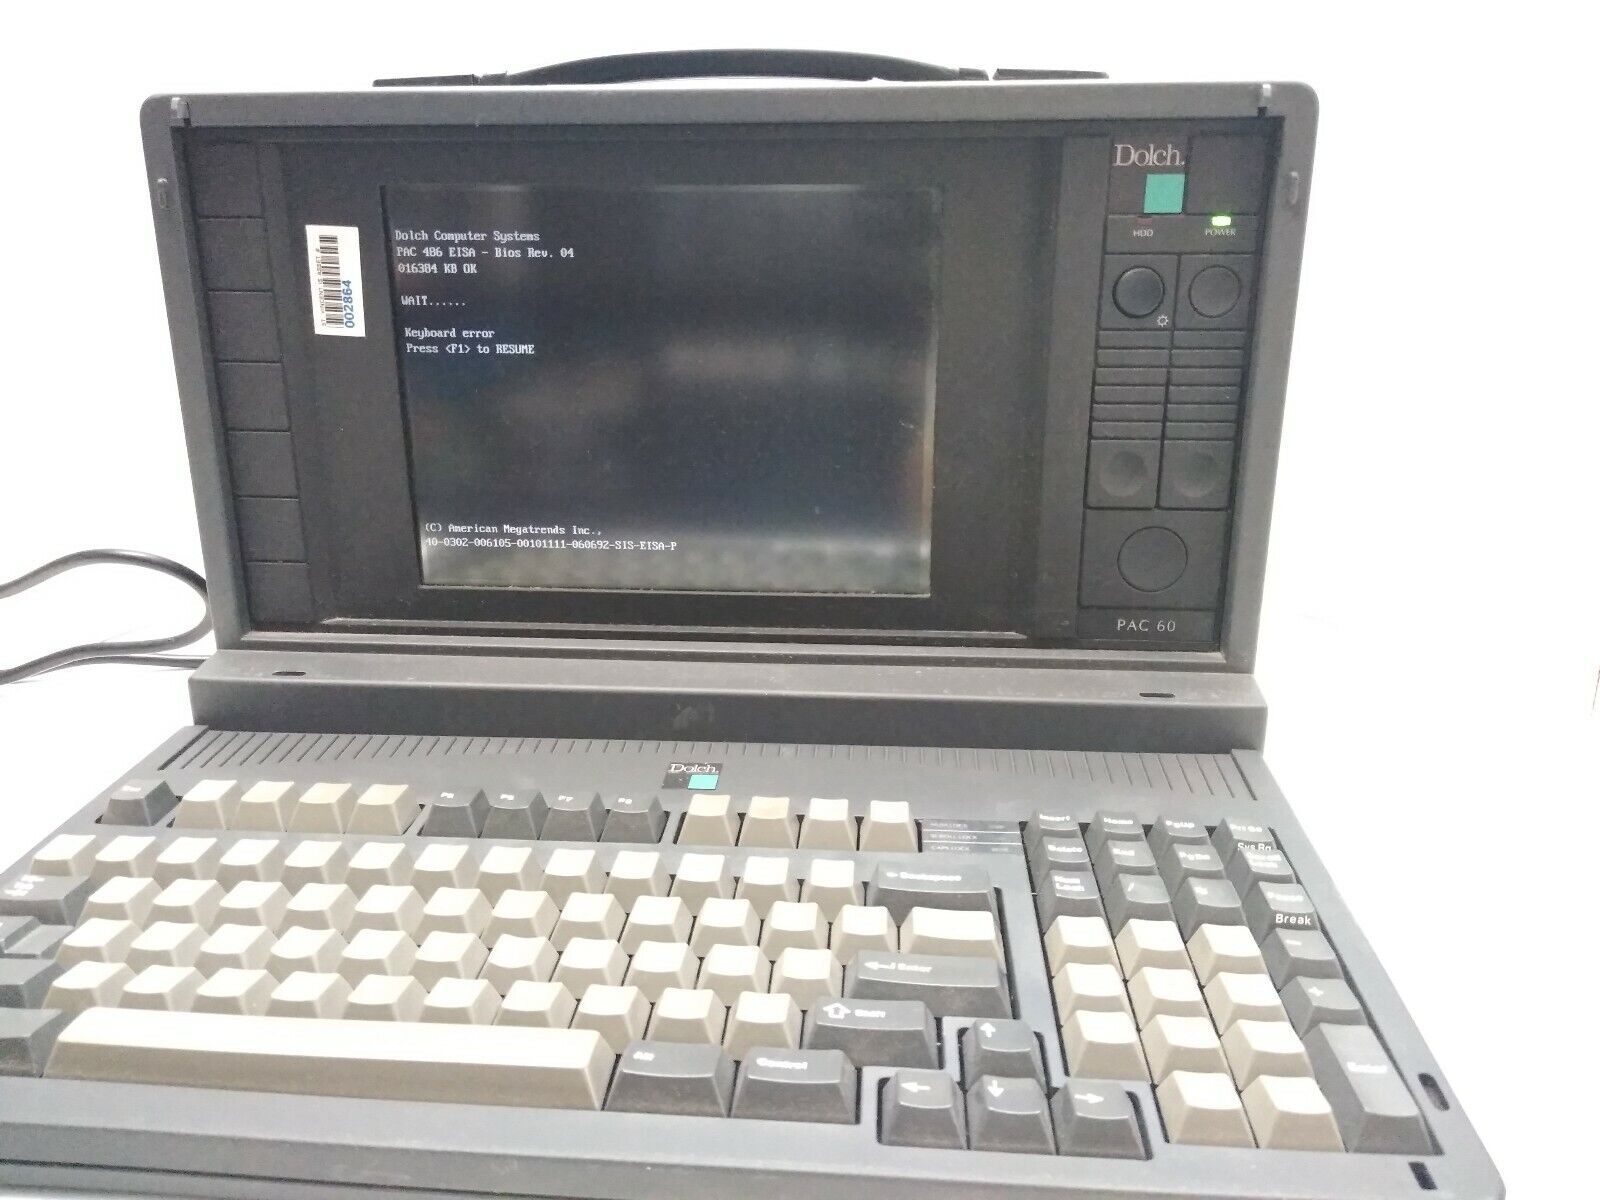 Dolch Computer Systems PAC 60 Portable PC LCD, Floppy drive, Powers On